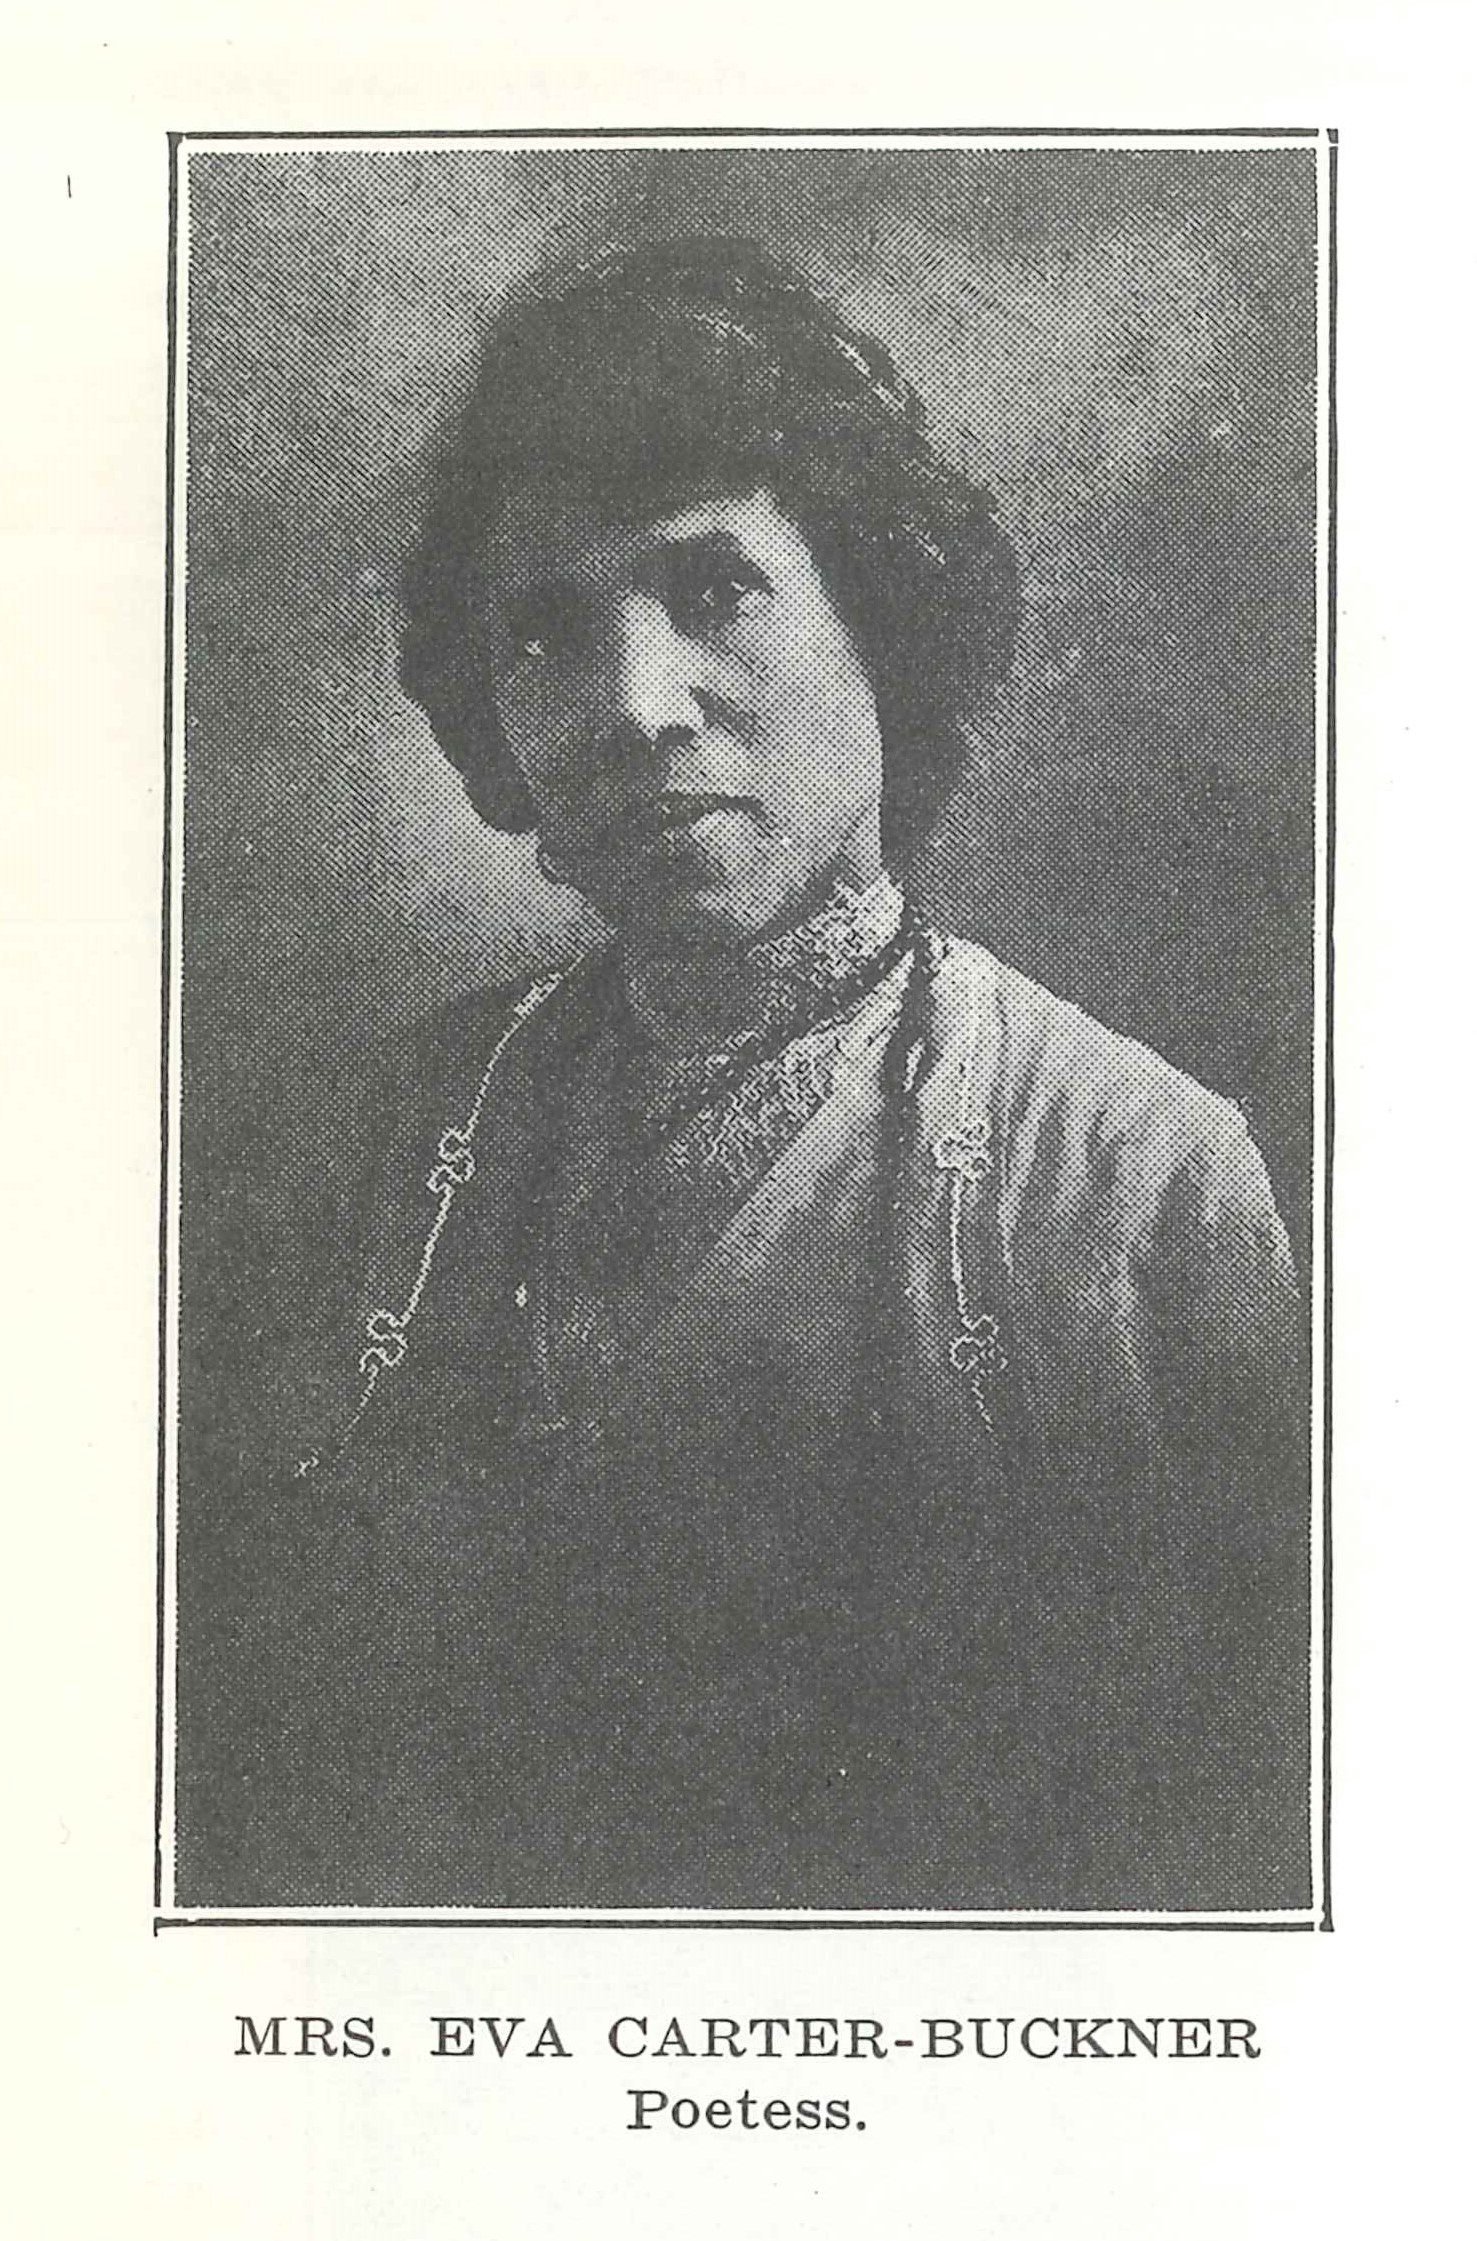 Bust portrait of Eva Carter Buckner. She is wearing an embroidered jacket and lace high neck shirt. Historic black and white photograph.